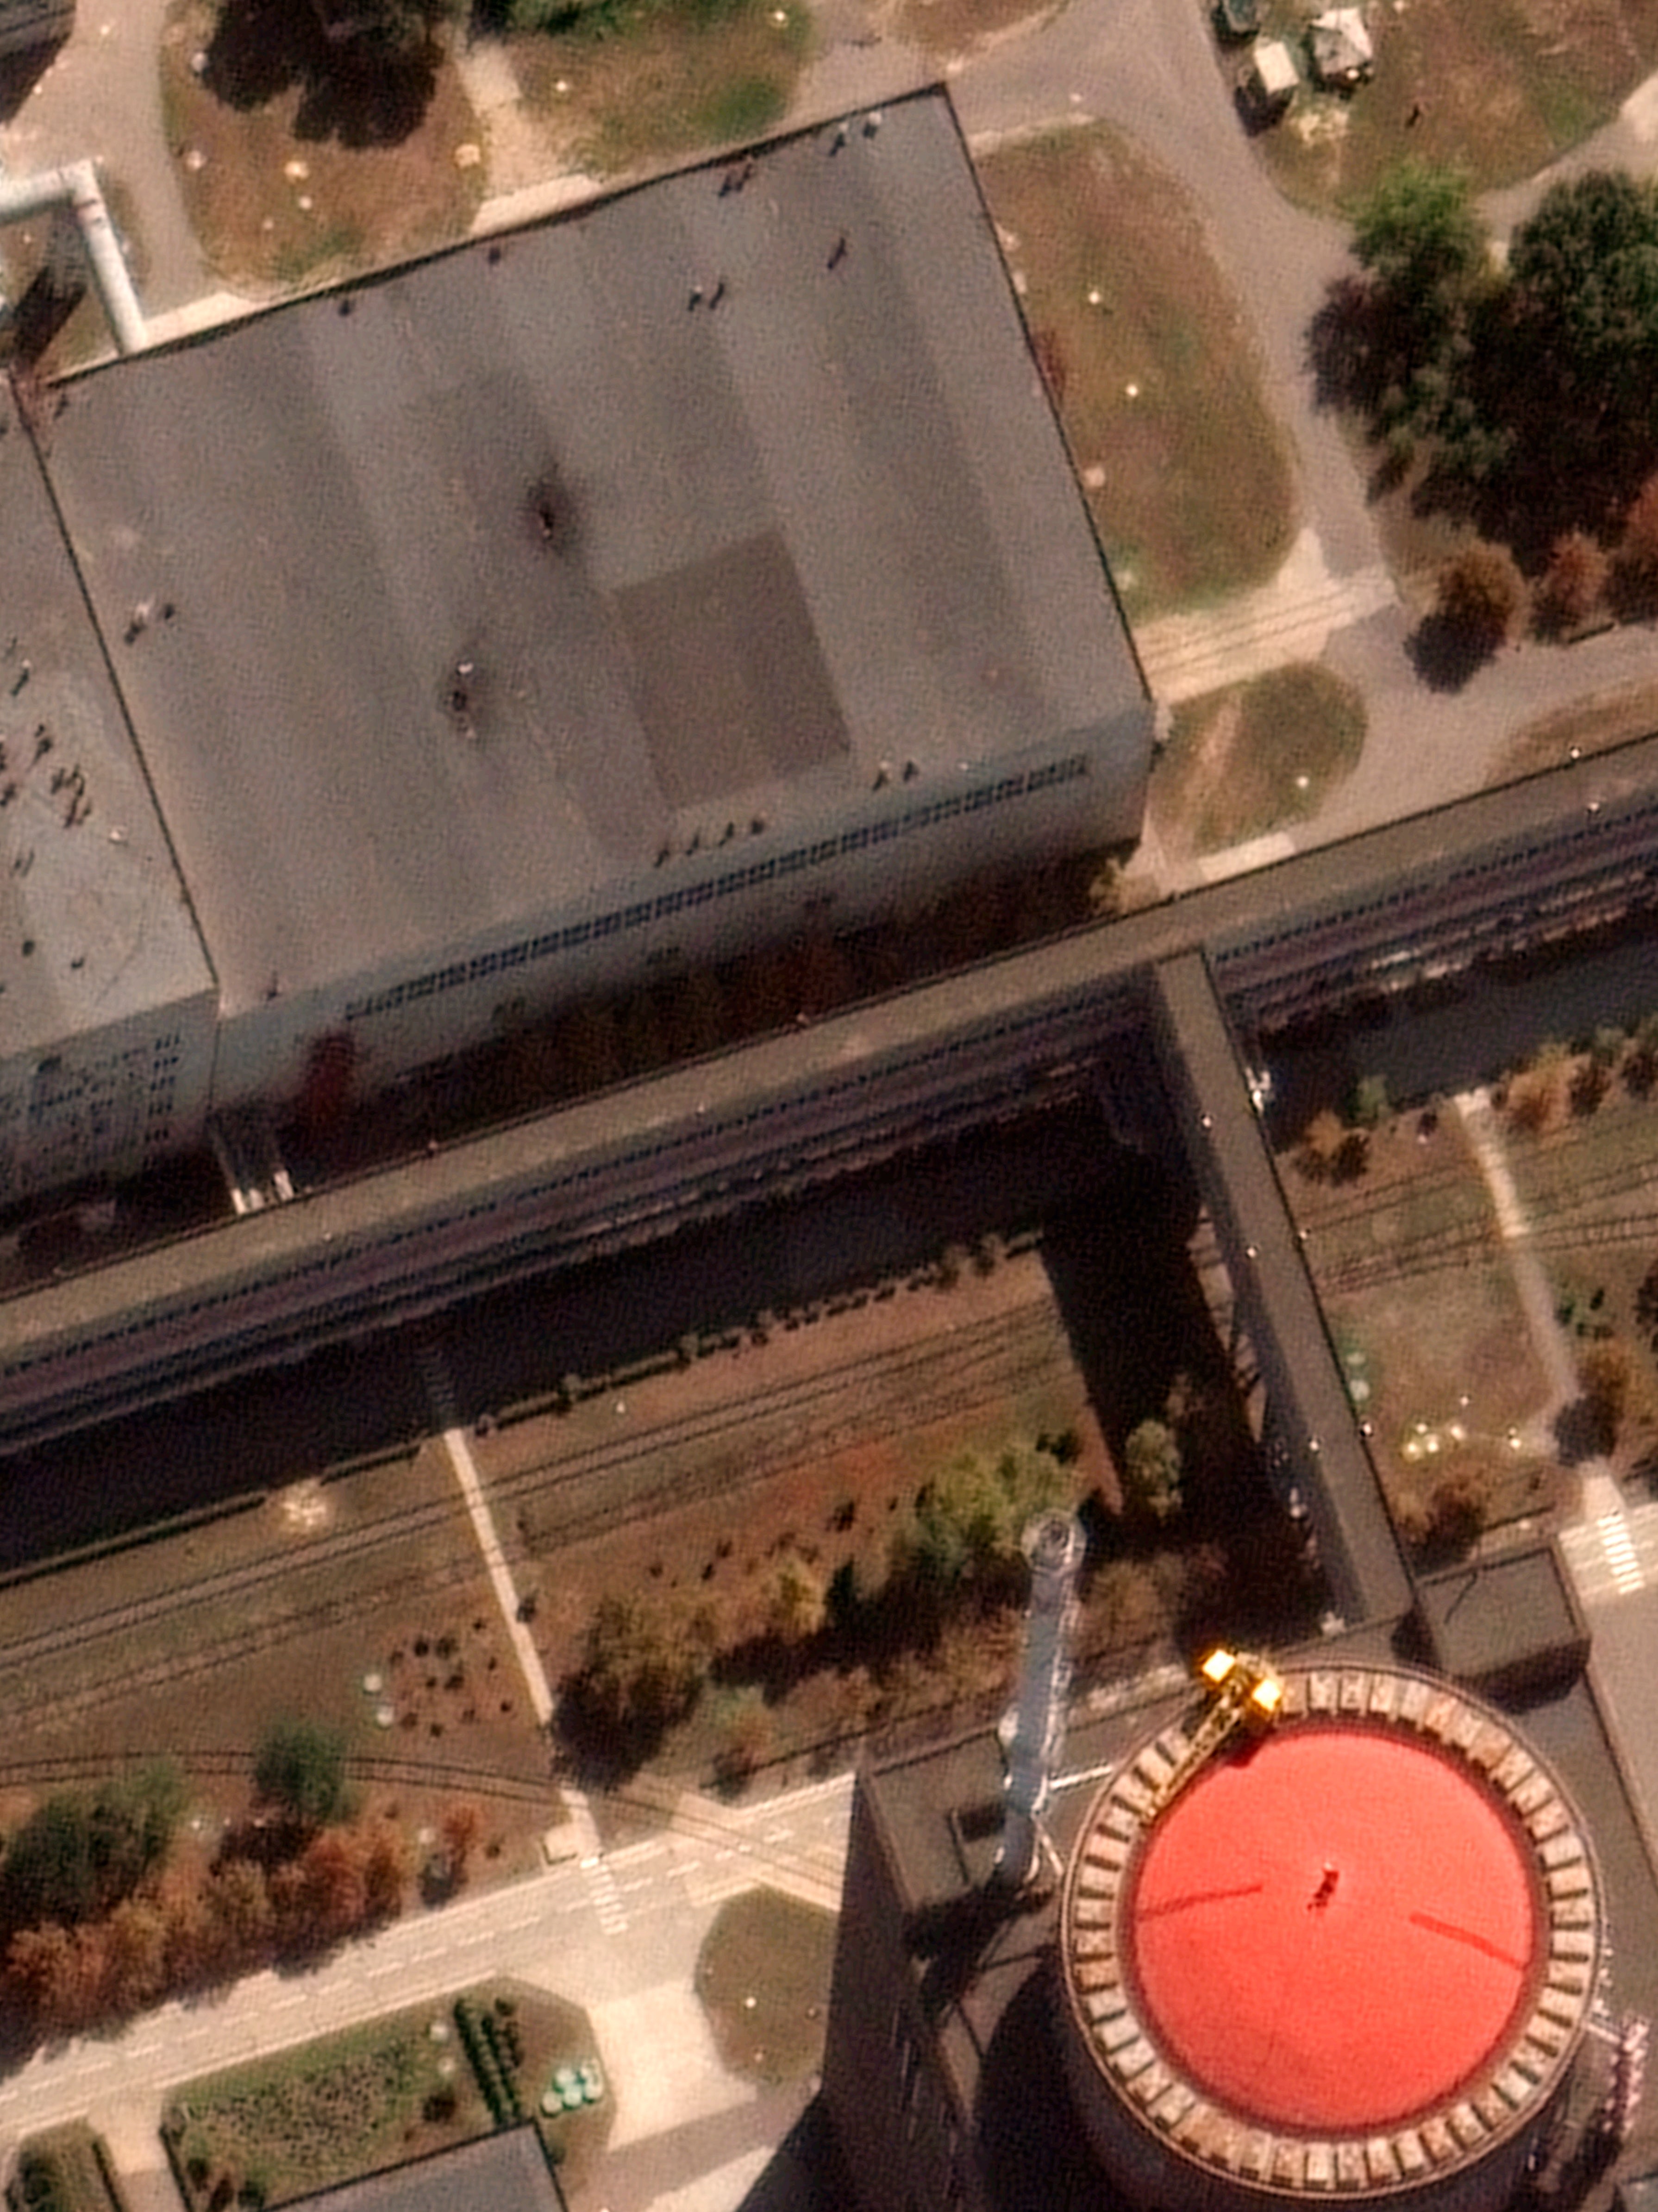 Satellite image from Maxar Technologies shows recent damage to the roof of a building adjacent to a nuclear reactor (red top) at Zaporizhzhia